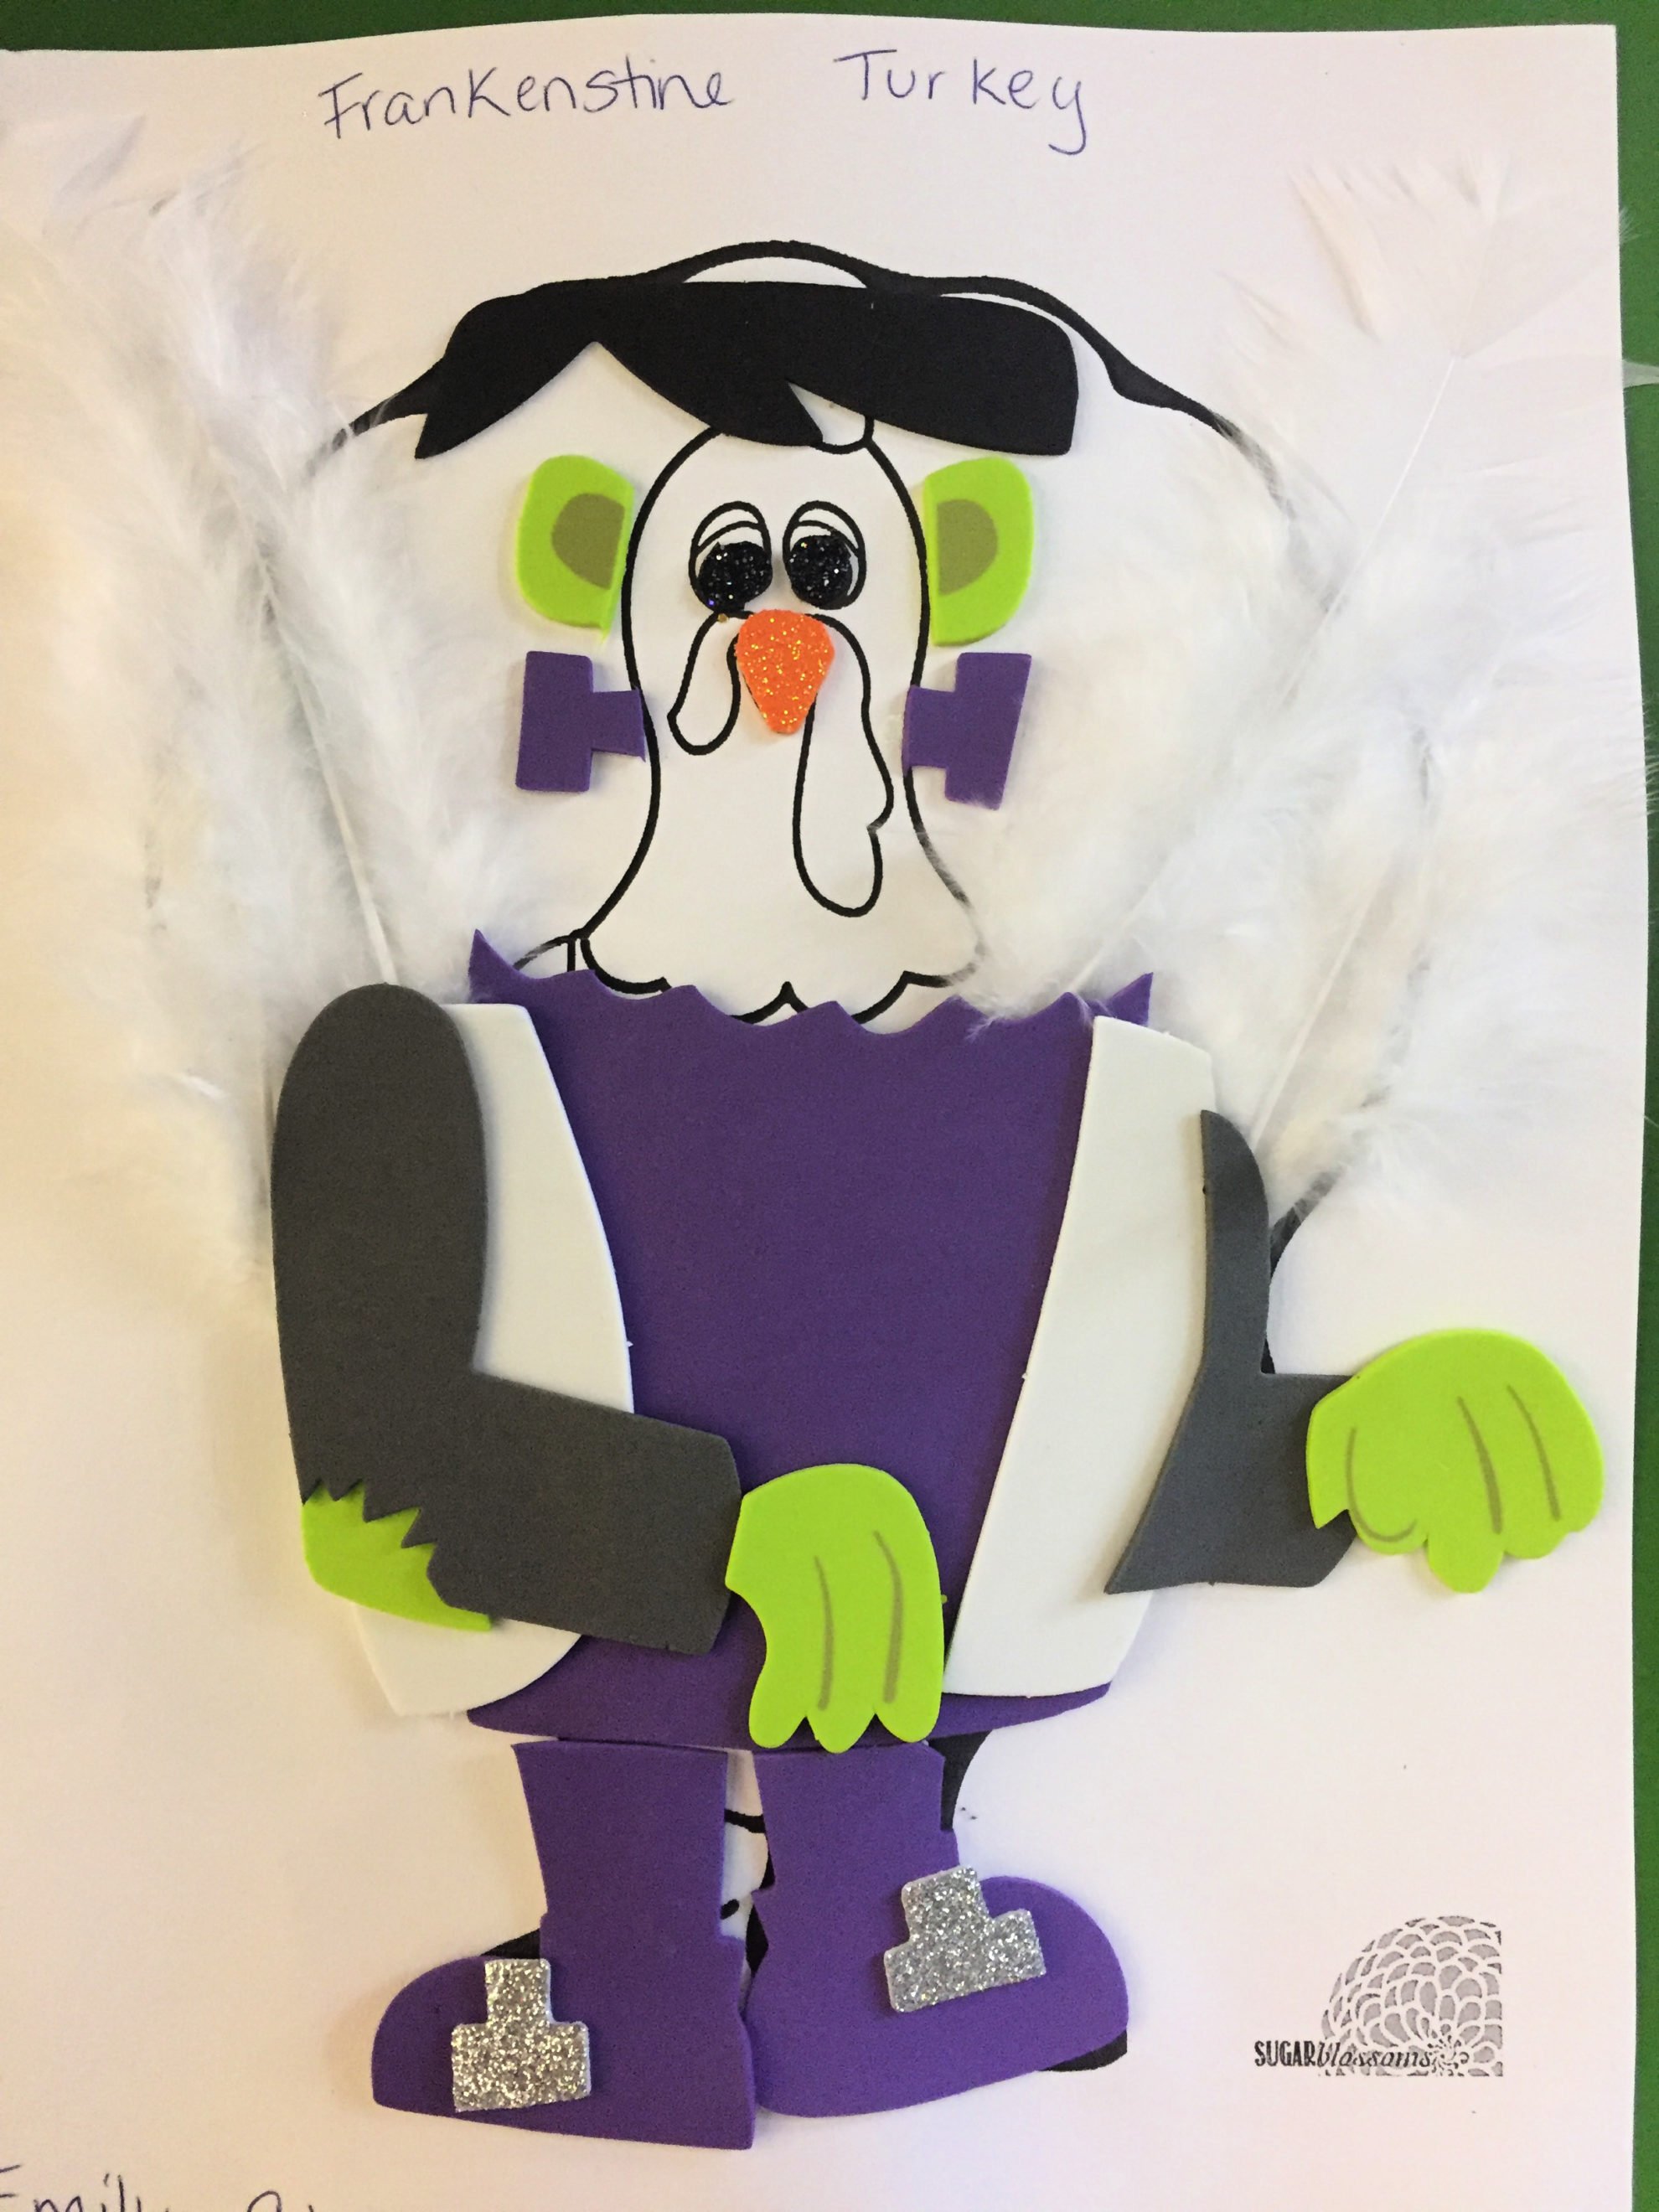 Paper Turkey In Disguise dressed as Frankenstein with foam clothing, and white feathers in the back. 